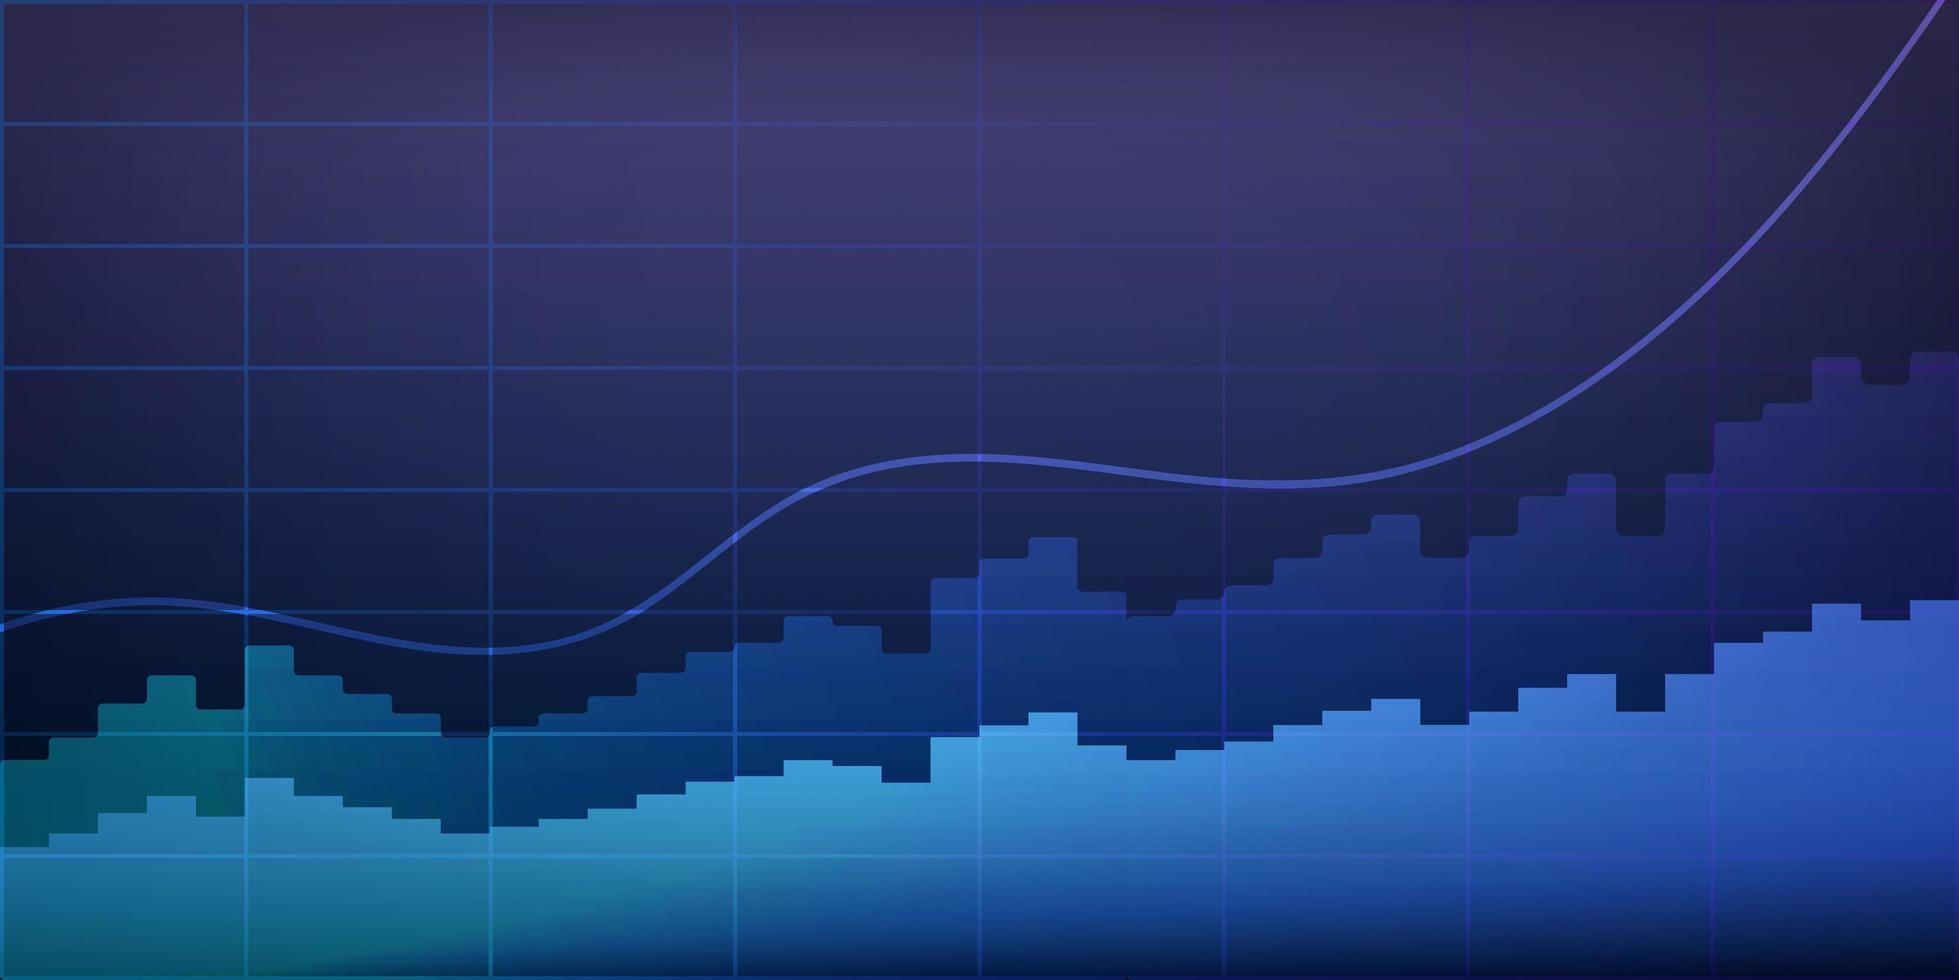 Background with financial charts. Neon colors. The concept of analytics, business or trading on the financial exchange. Vector. vector